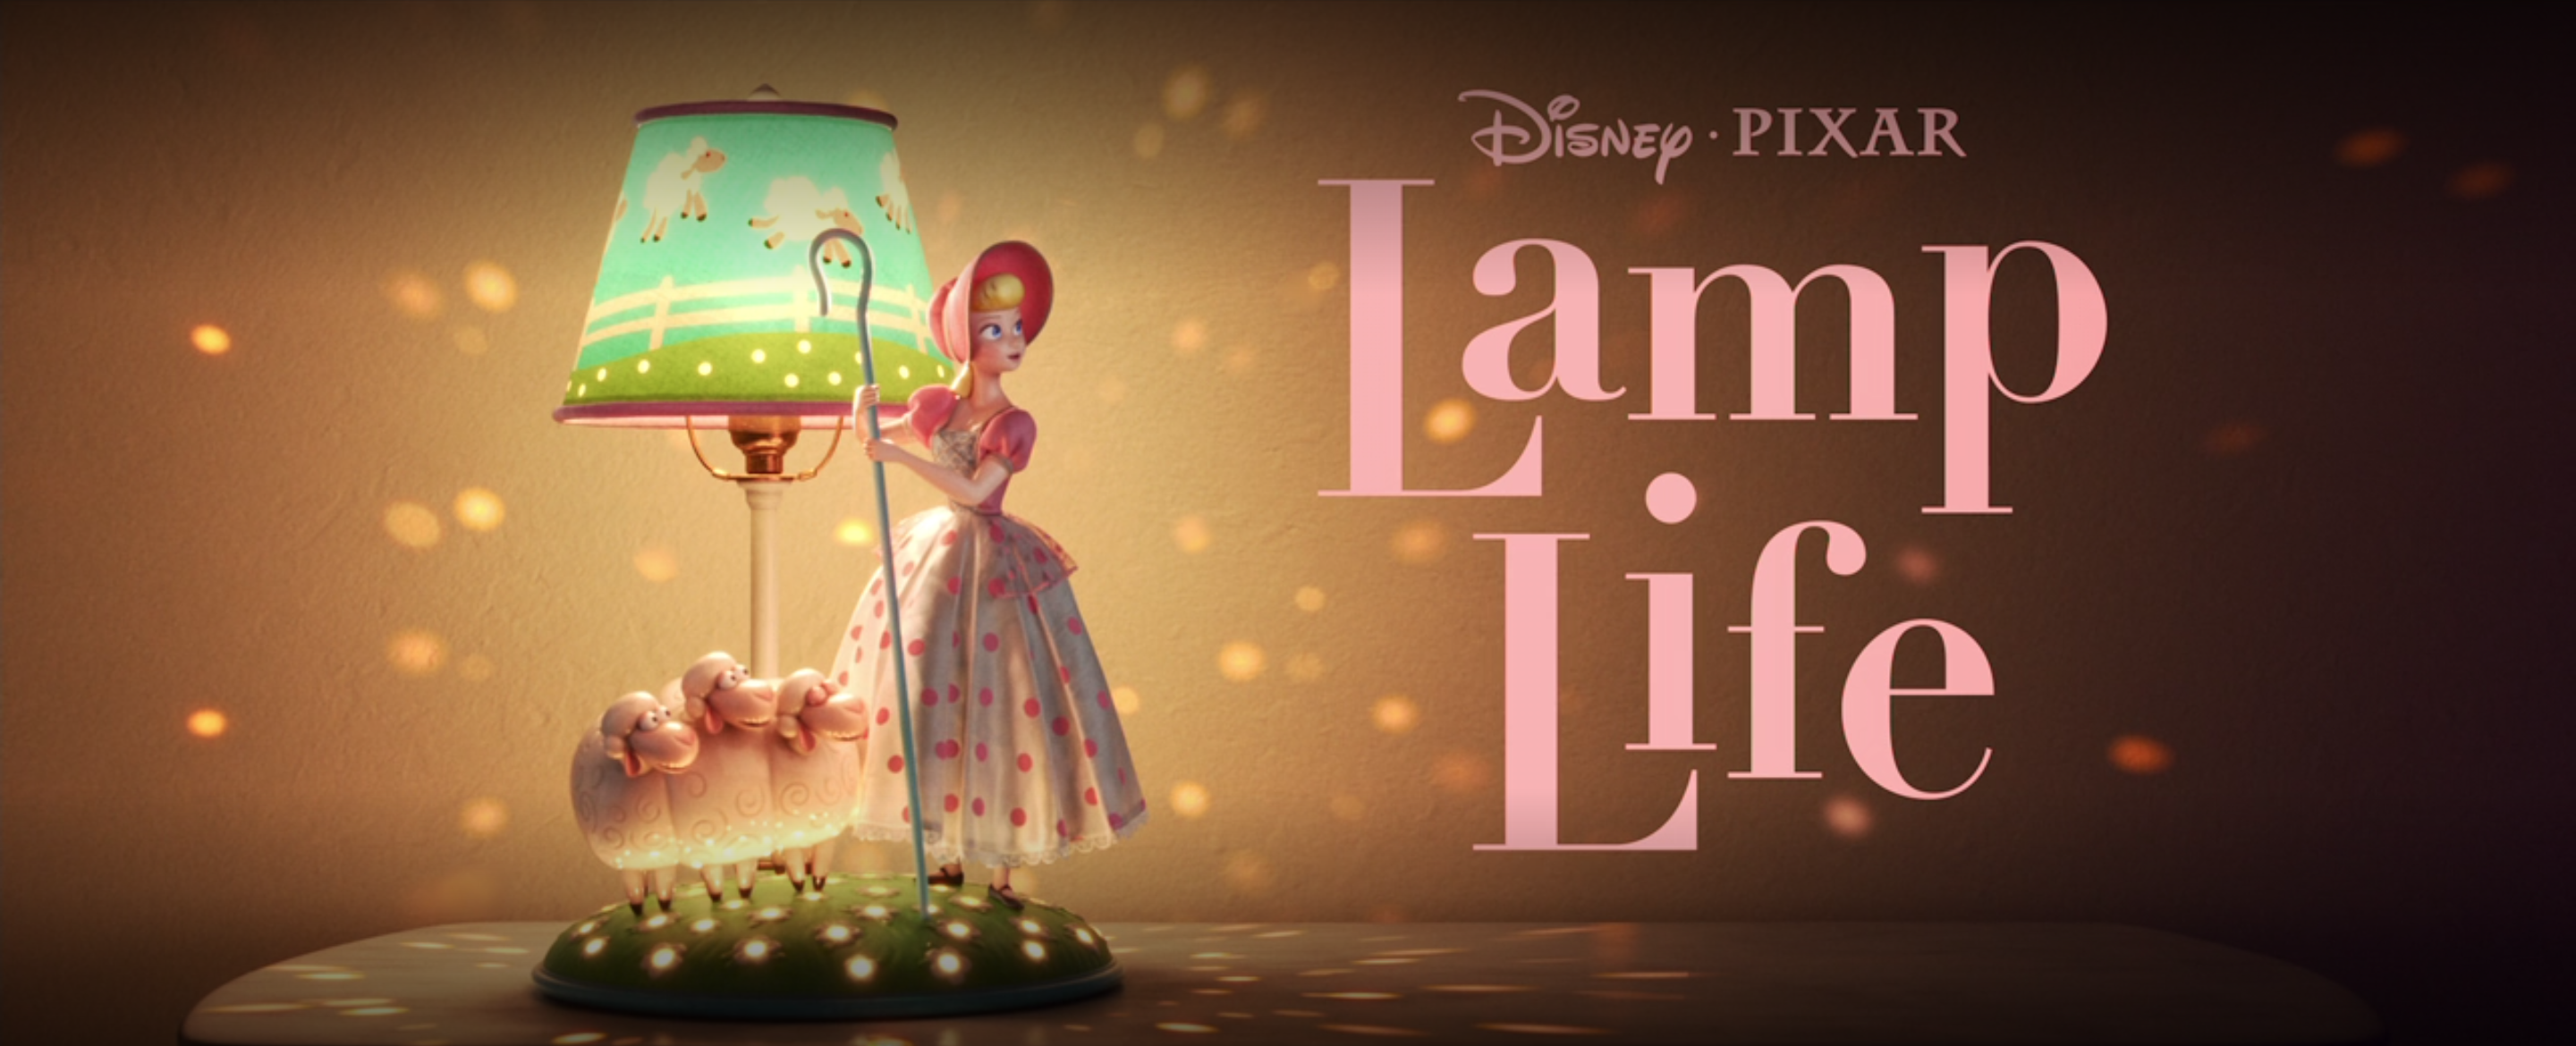 download lamp life toy story